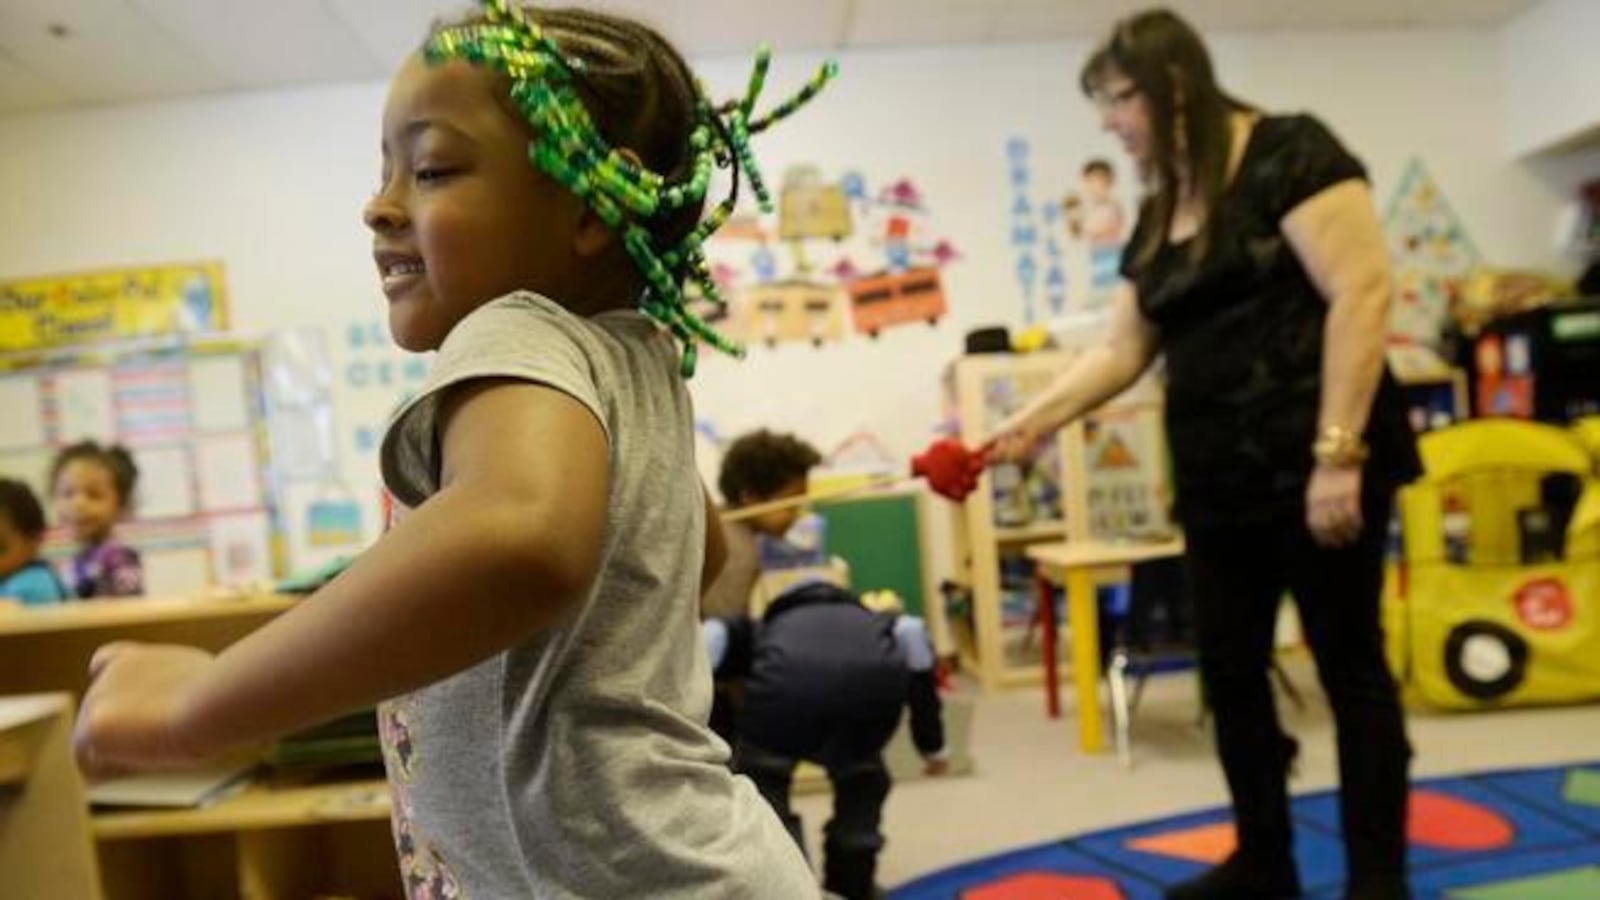 Zoe Johnson, 4, dances after walking through the limbo line in her Little Discoverers classroom at HOPE Center.